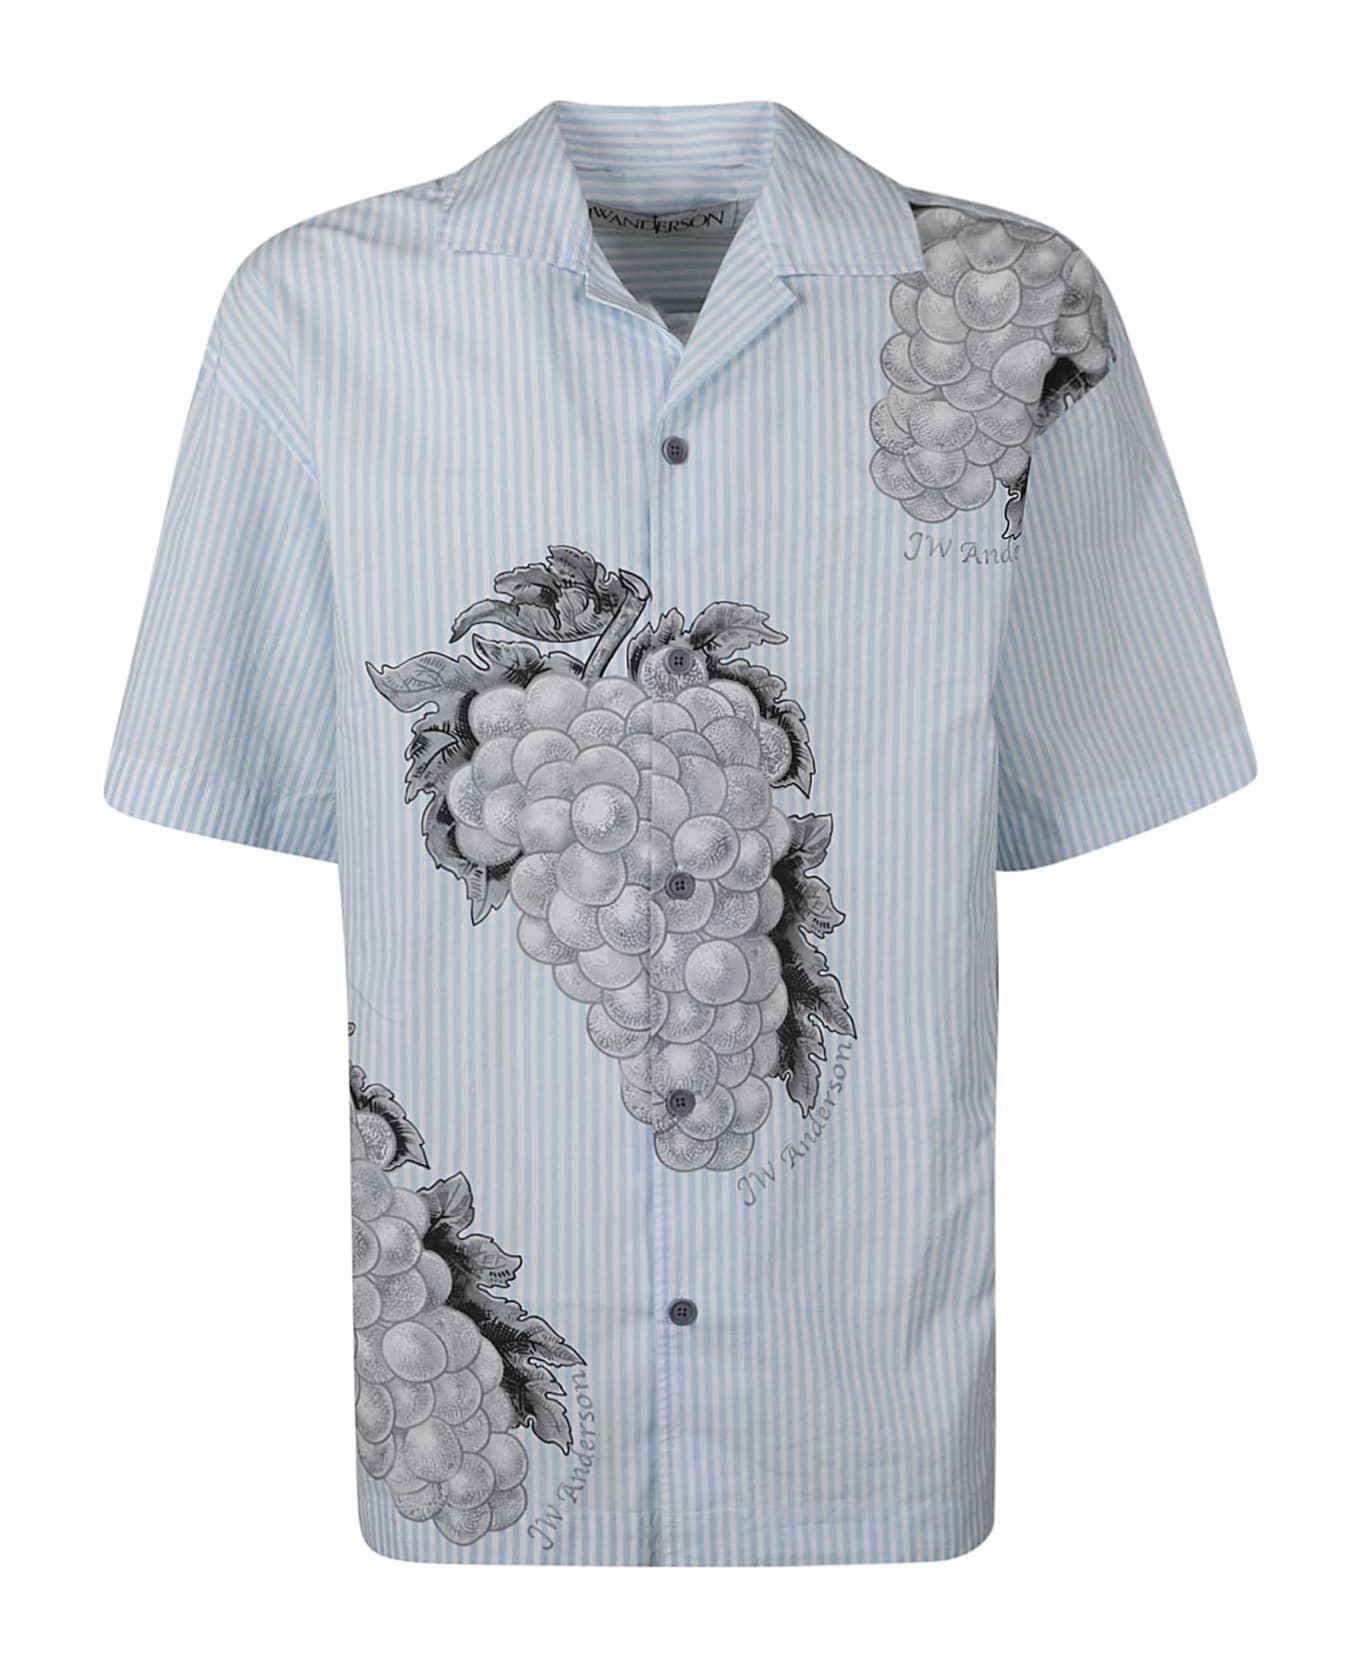 J.W. Anderson Boxy Fit Short Sleeved Shirt - Light Blue